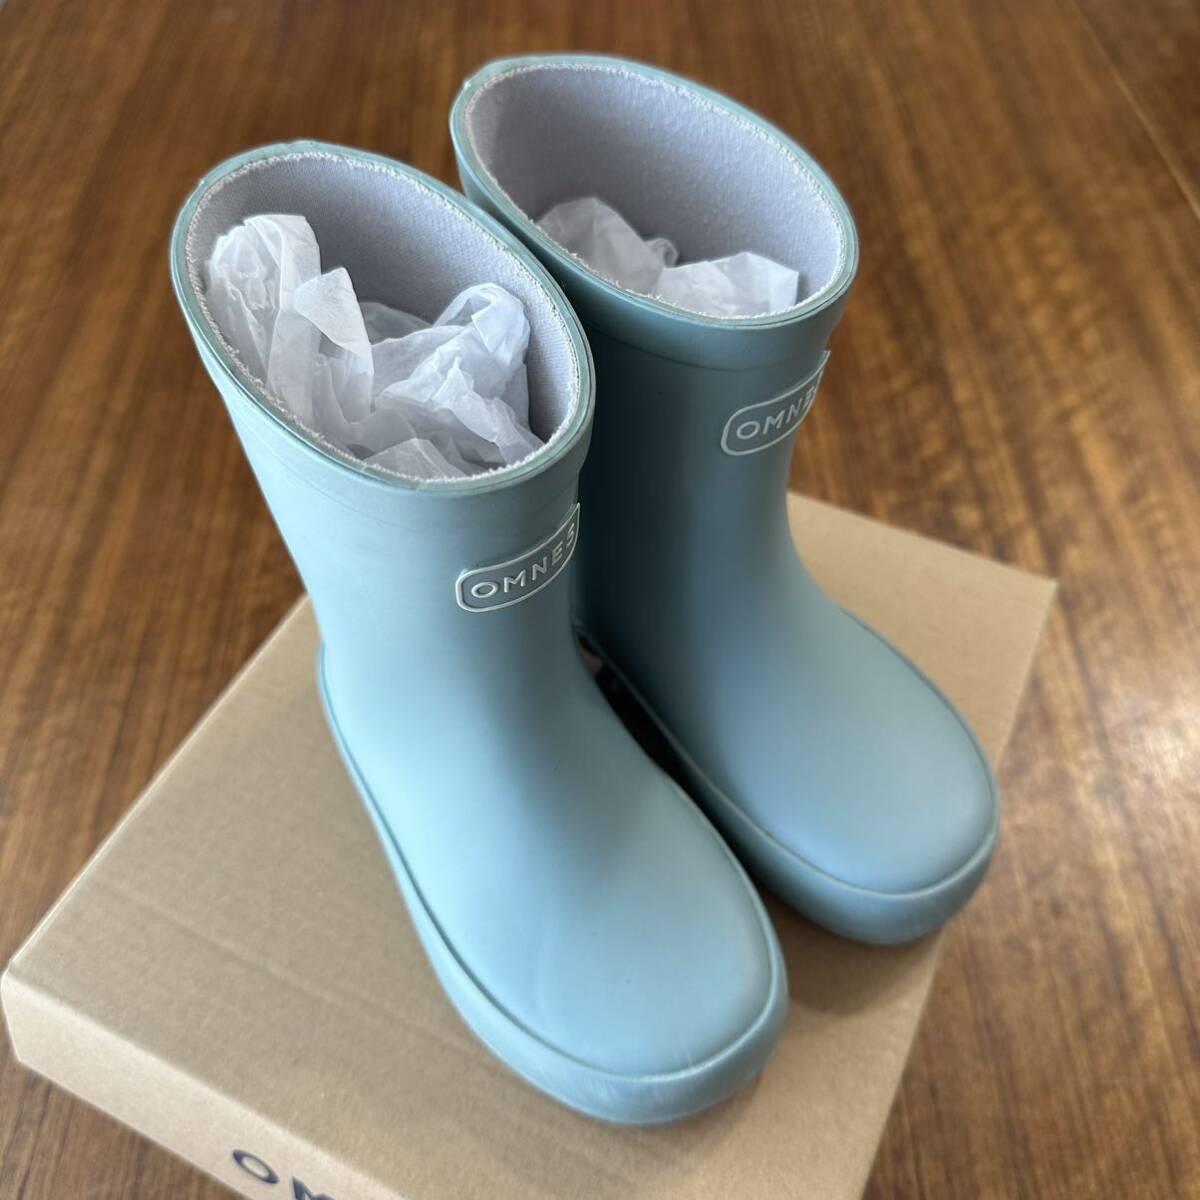  rain boots baby Kids size boots OMNES 15cm moss green free shipping EAZY. send 